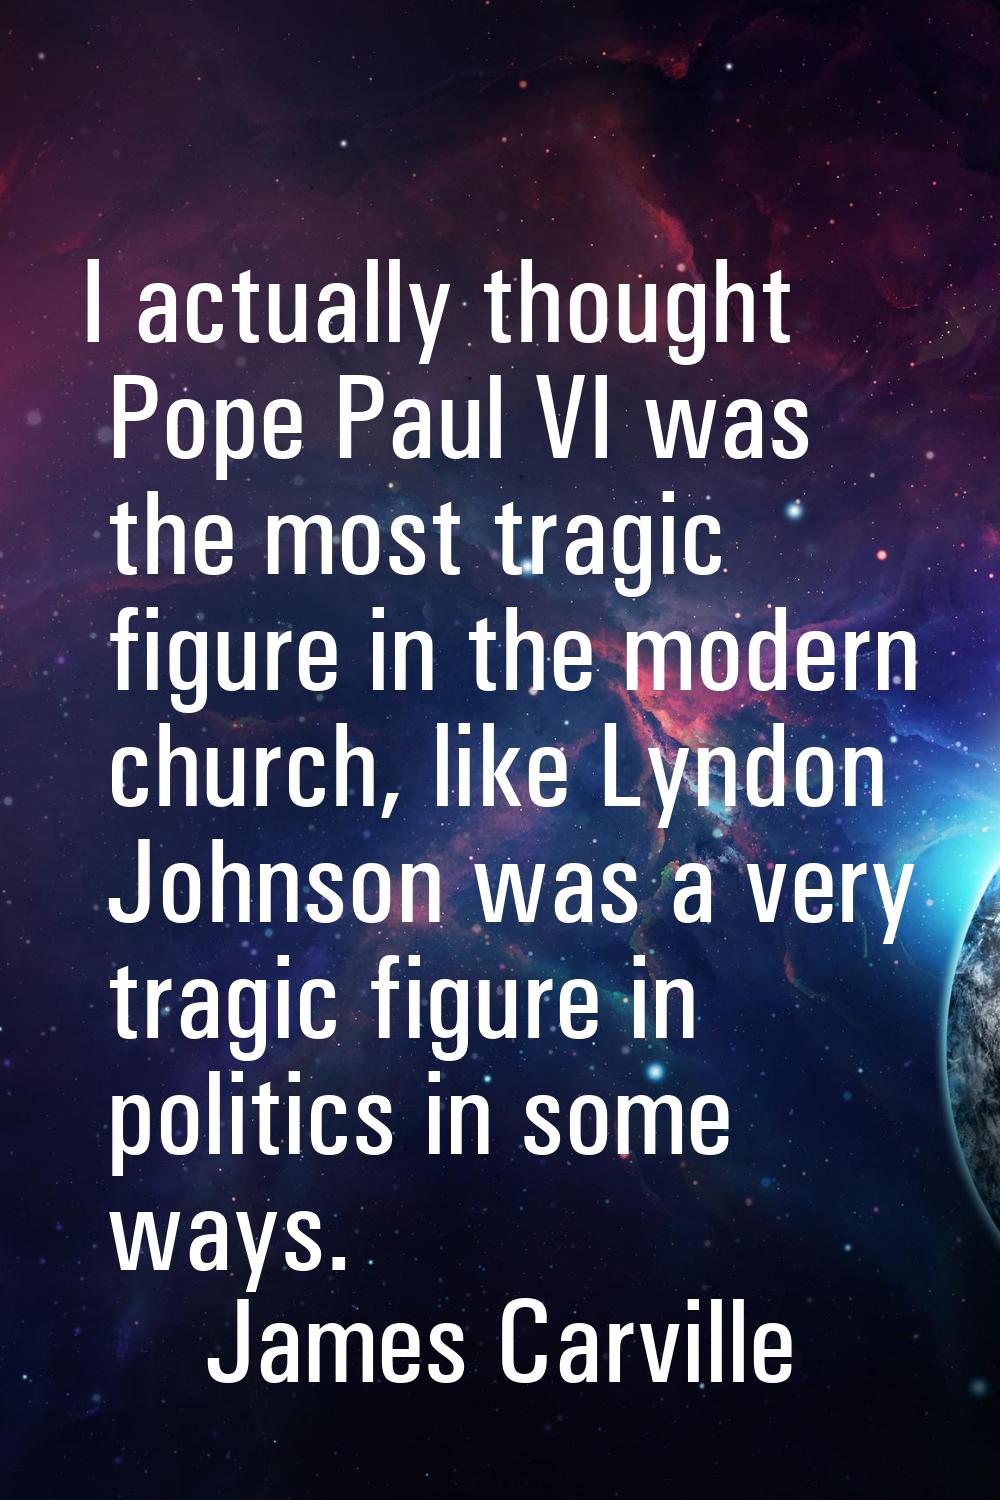 I actually thought Pope Paul VI was the most tragic figure in the modern church, like Lyndon Johnso